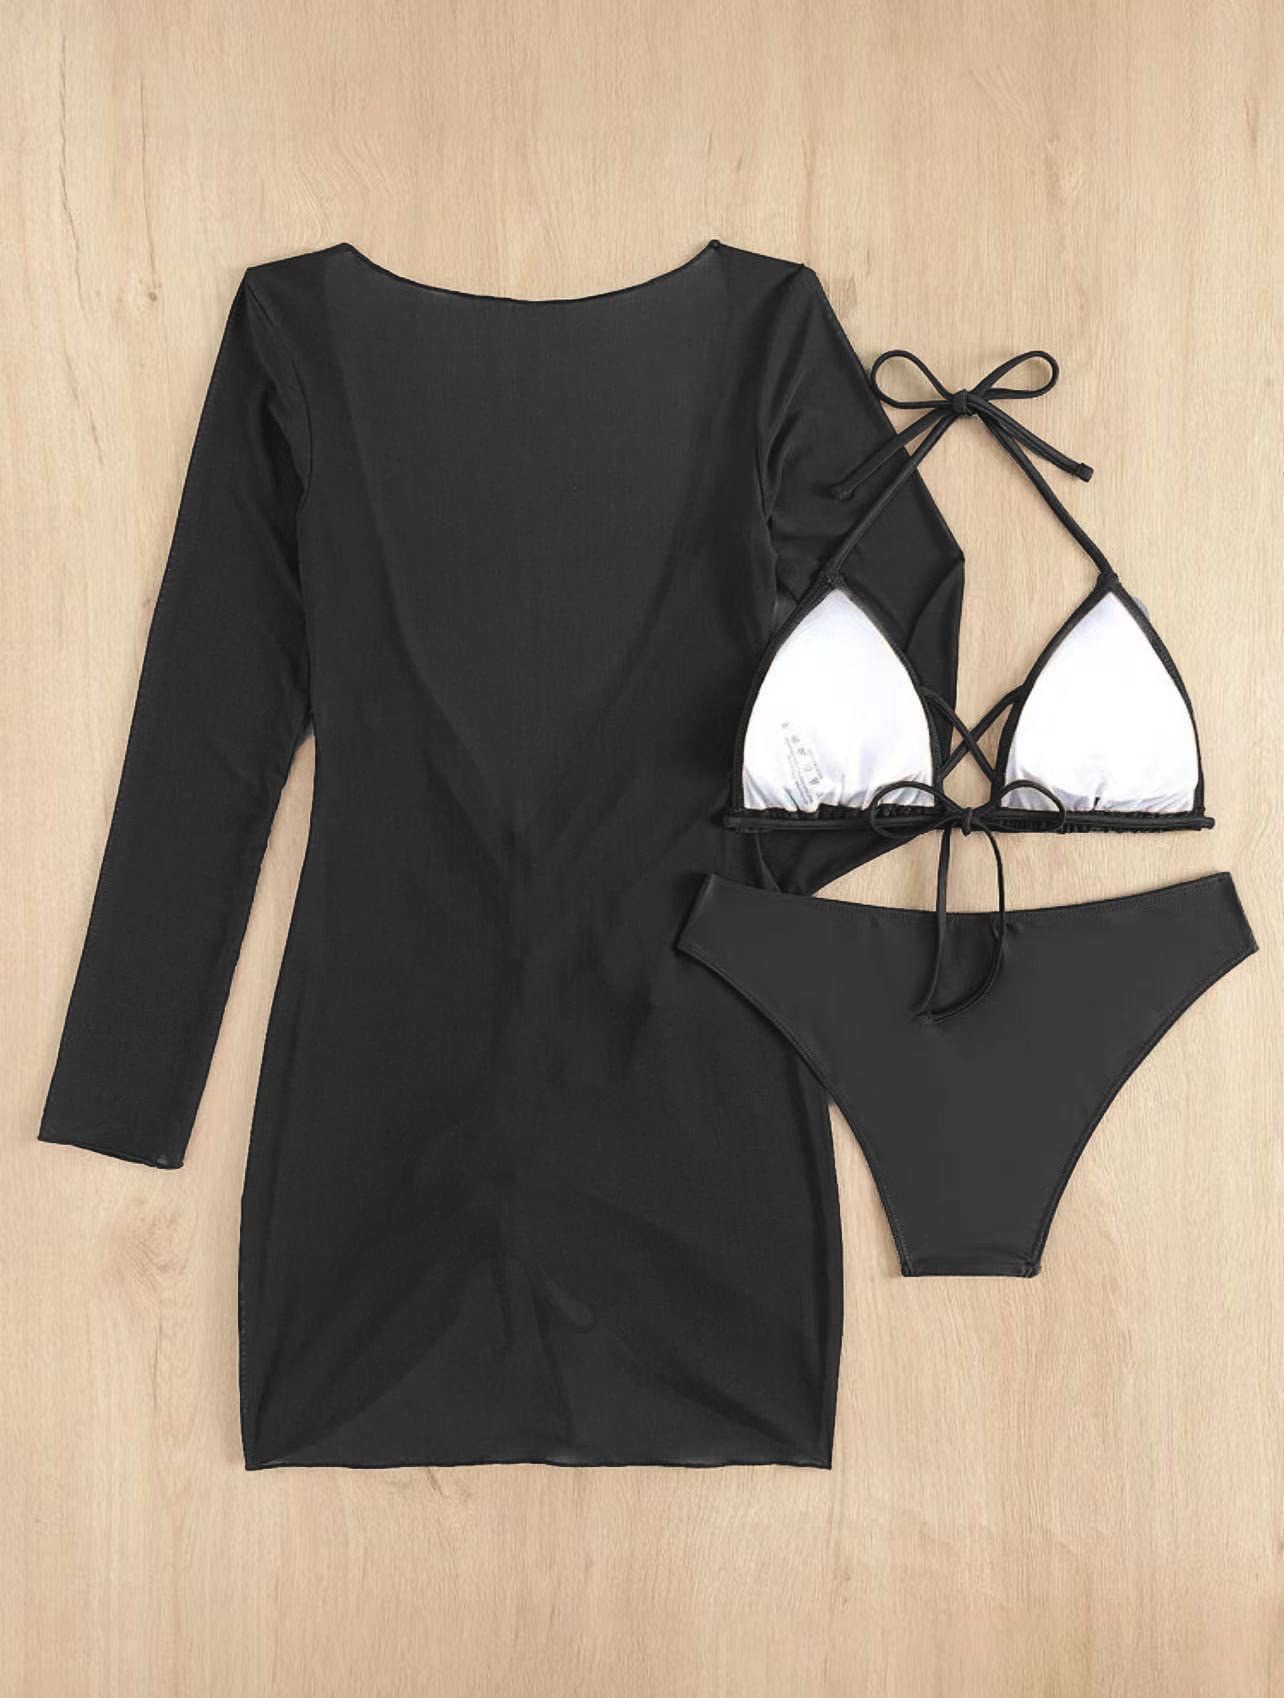 SherryDC Women's Sexy 3 Piece Swimsuits Halter Triangle Bikini Sets with Long Sleeve Cover Up Drawstring Bathing Suit